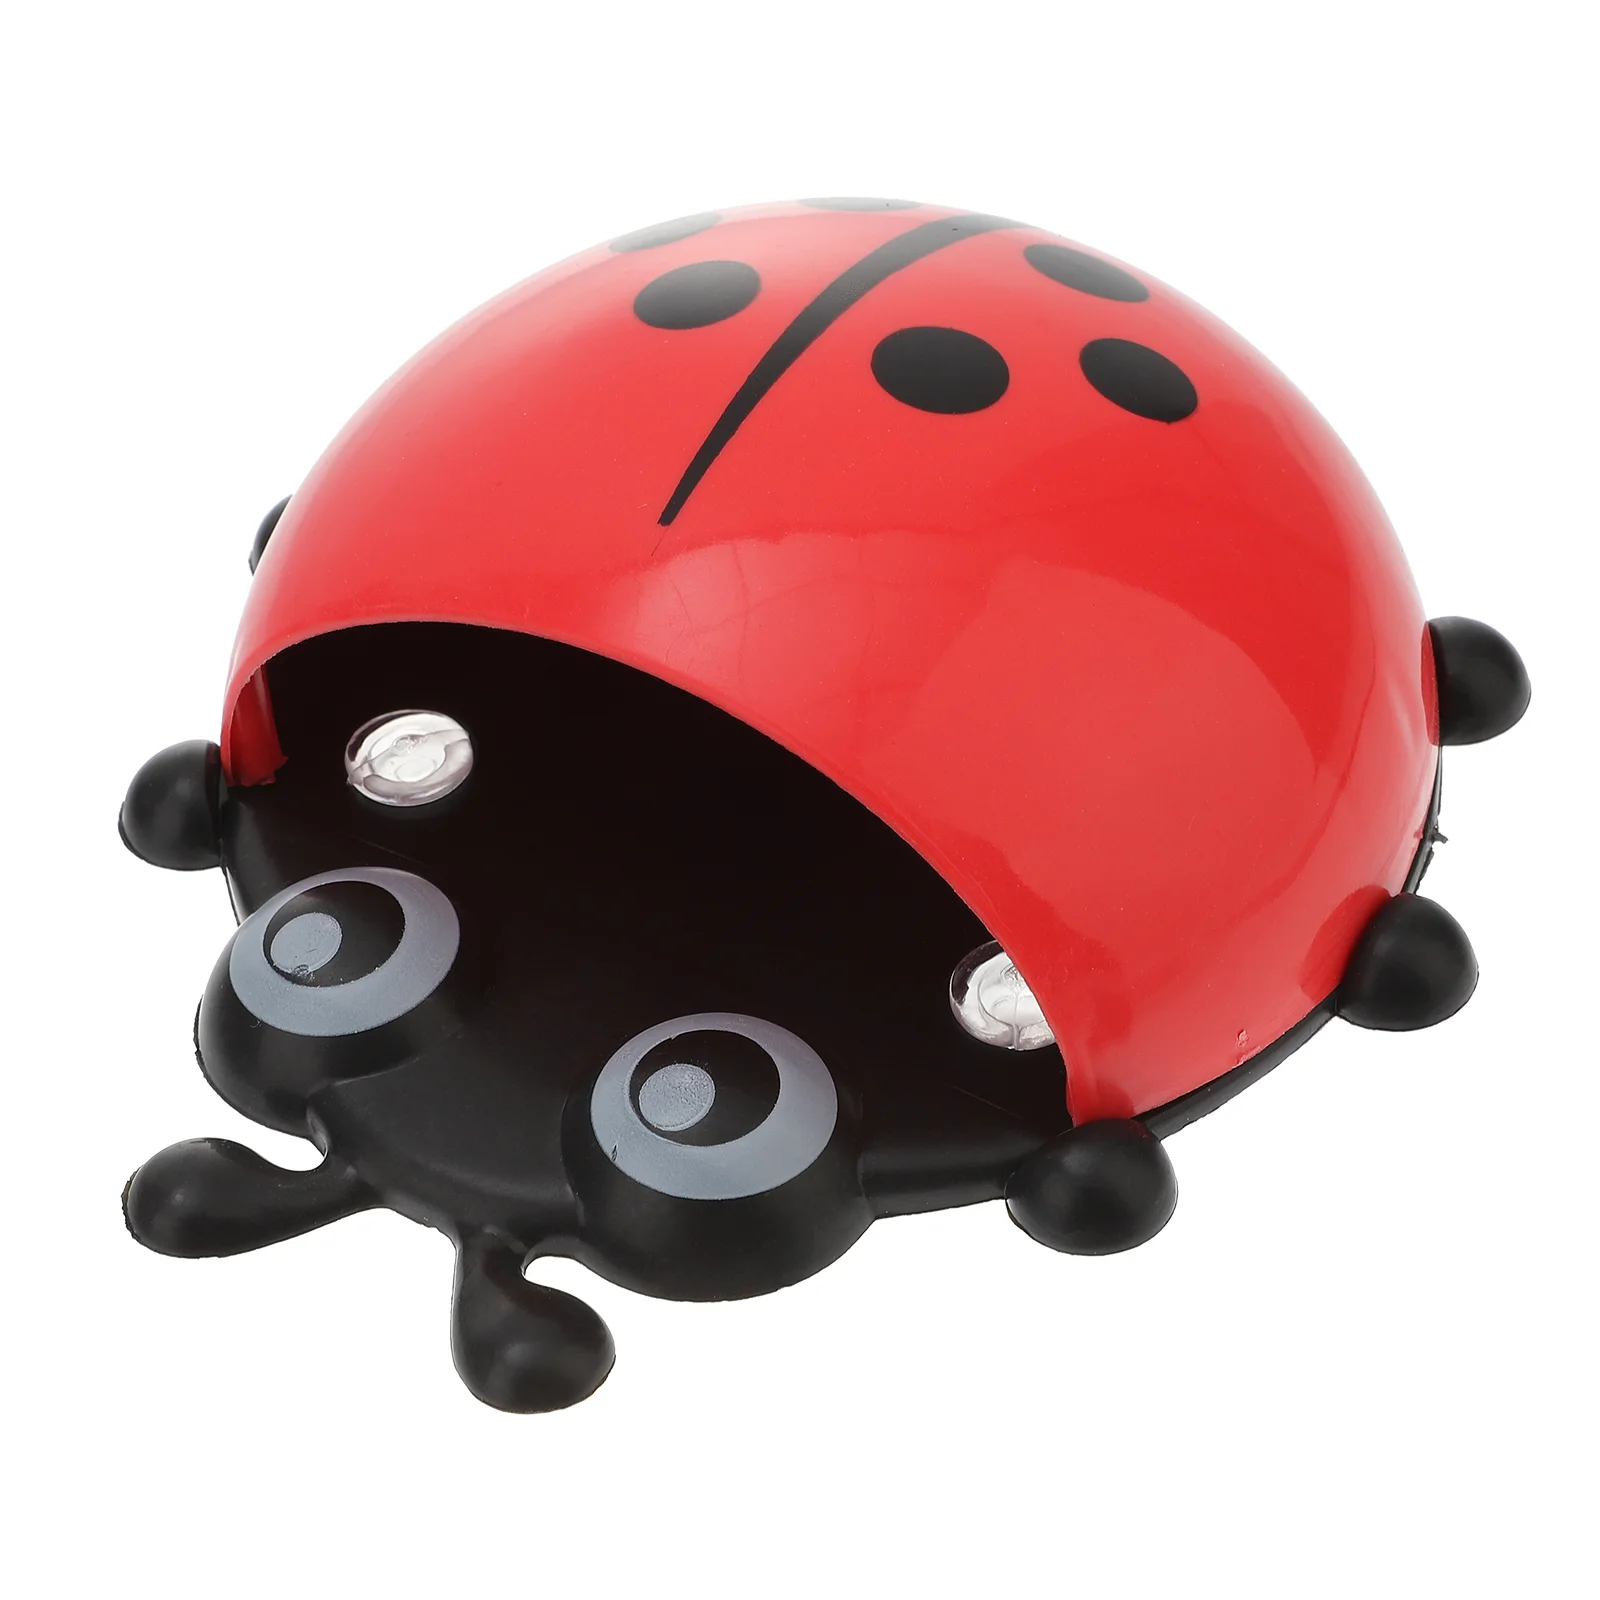 

Kids Wall Suction Cup Mount Holder Cartoon Ladybug Toothpaste Container Box Storage Organizer Red